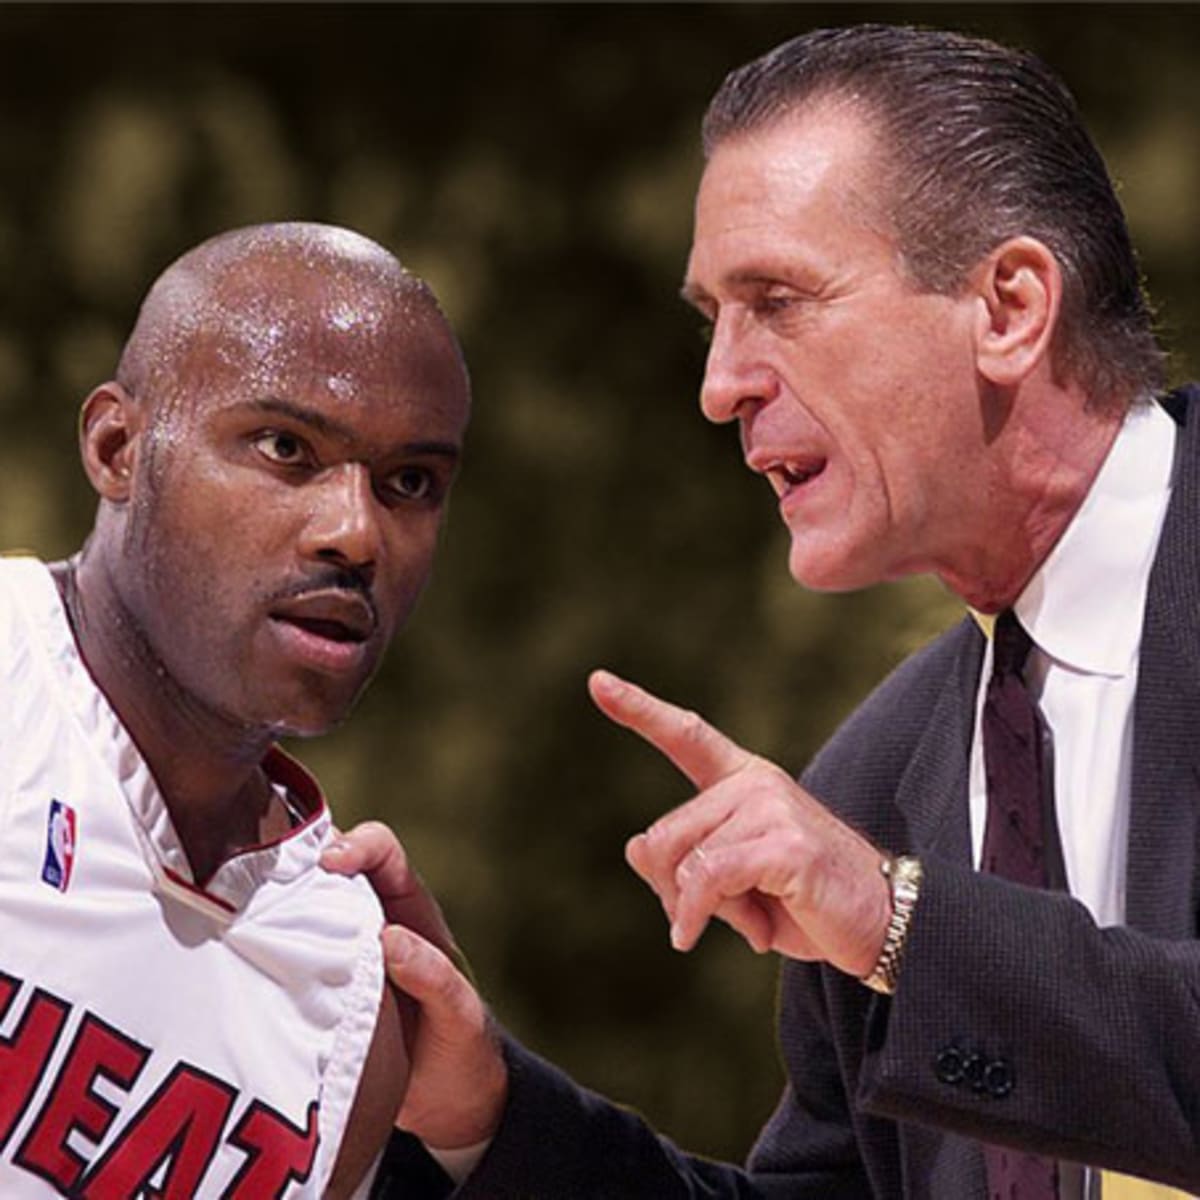 When Tim Hardaway tried to talk back to Pat Riley: 